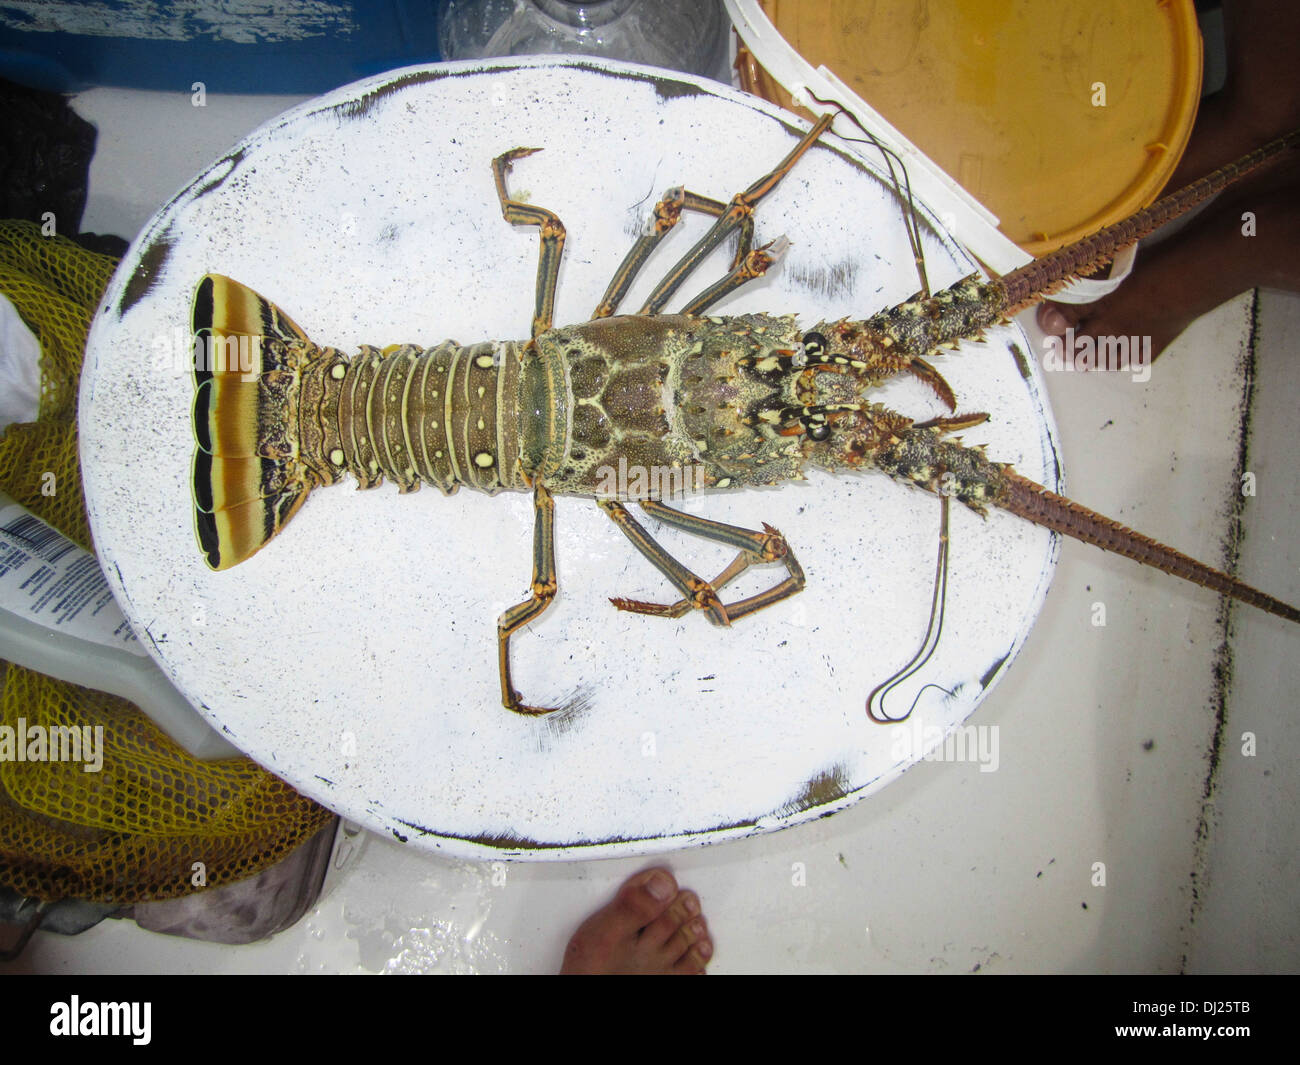 Caribbean Spiny Lobster (Panulirus argus) being readied for cooking photographed at Caye Caulker, Belize Stock Photo